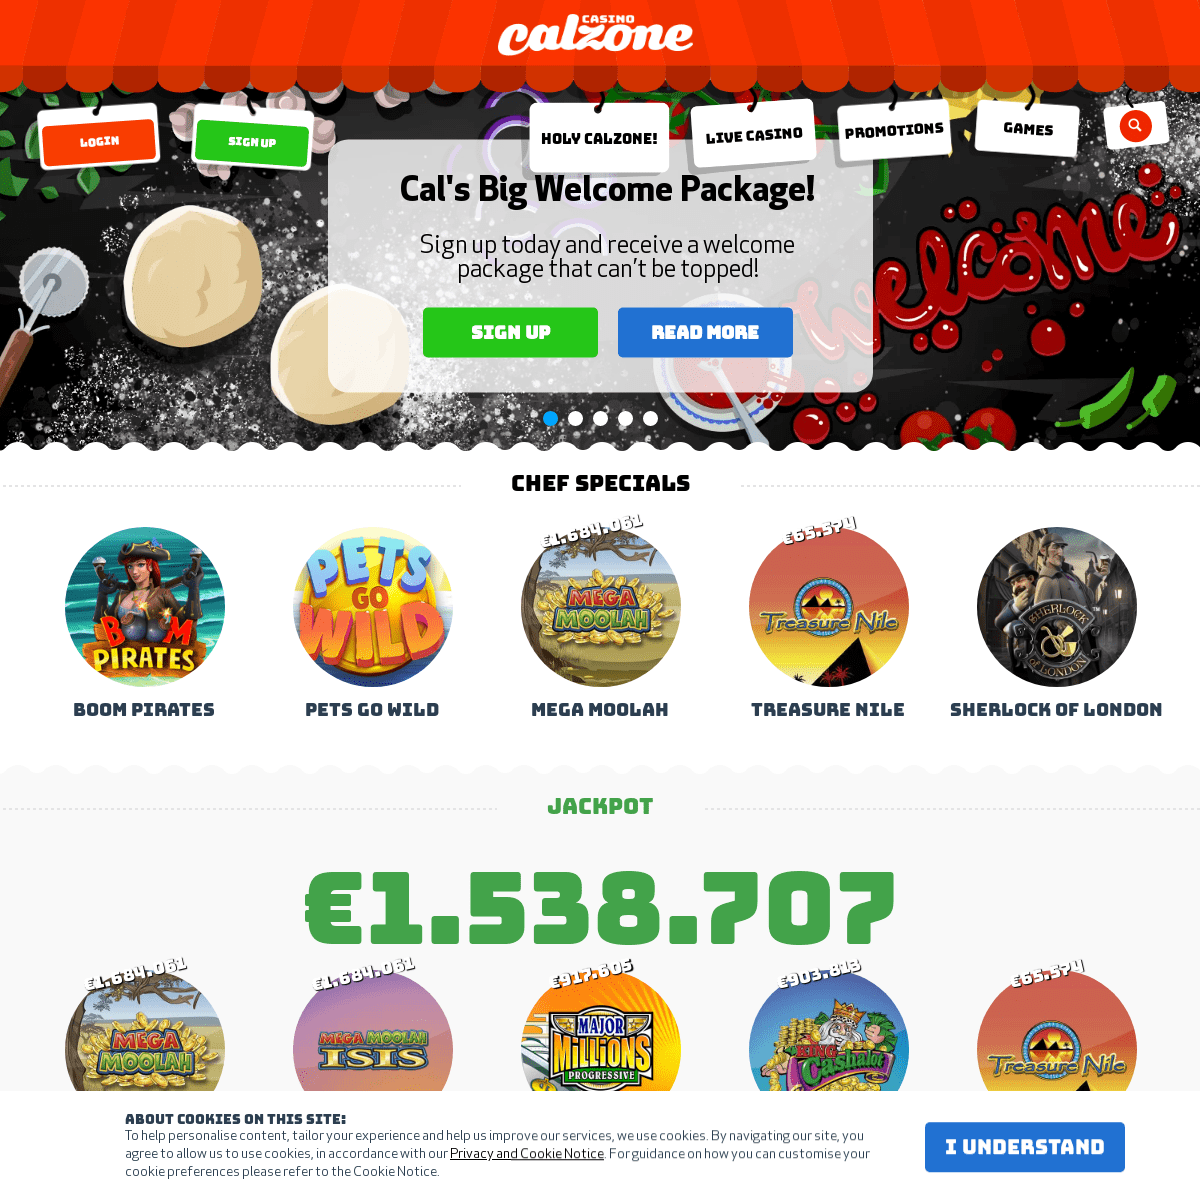 A complete backup of casinocalzone.com